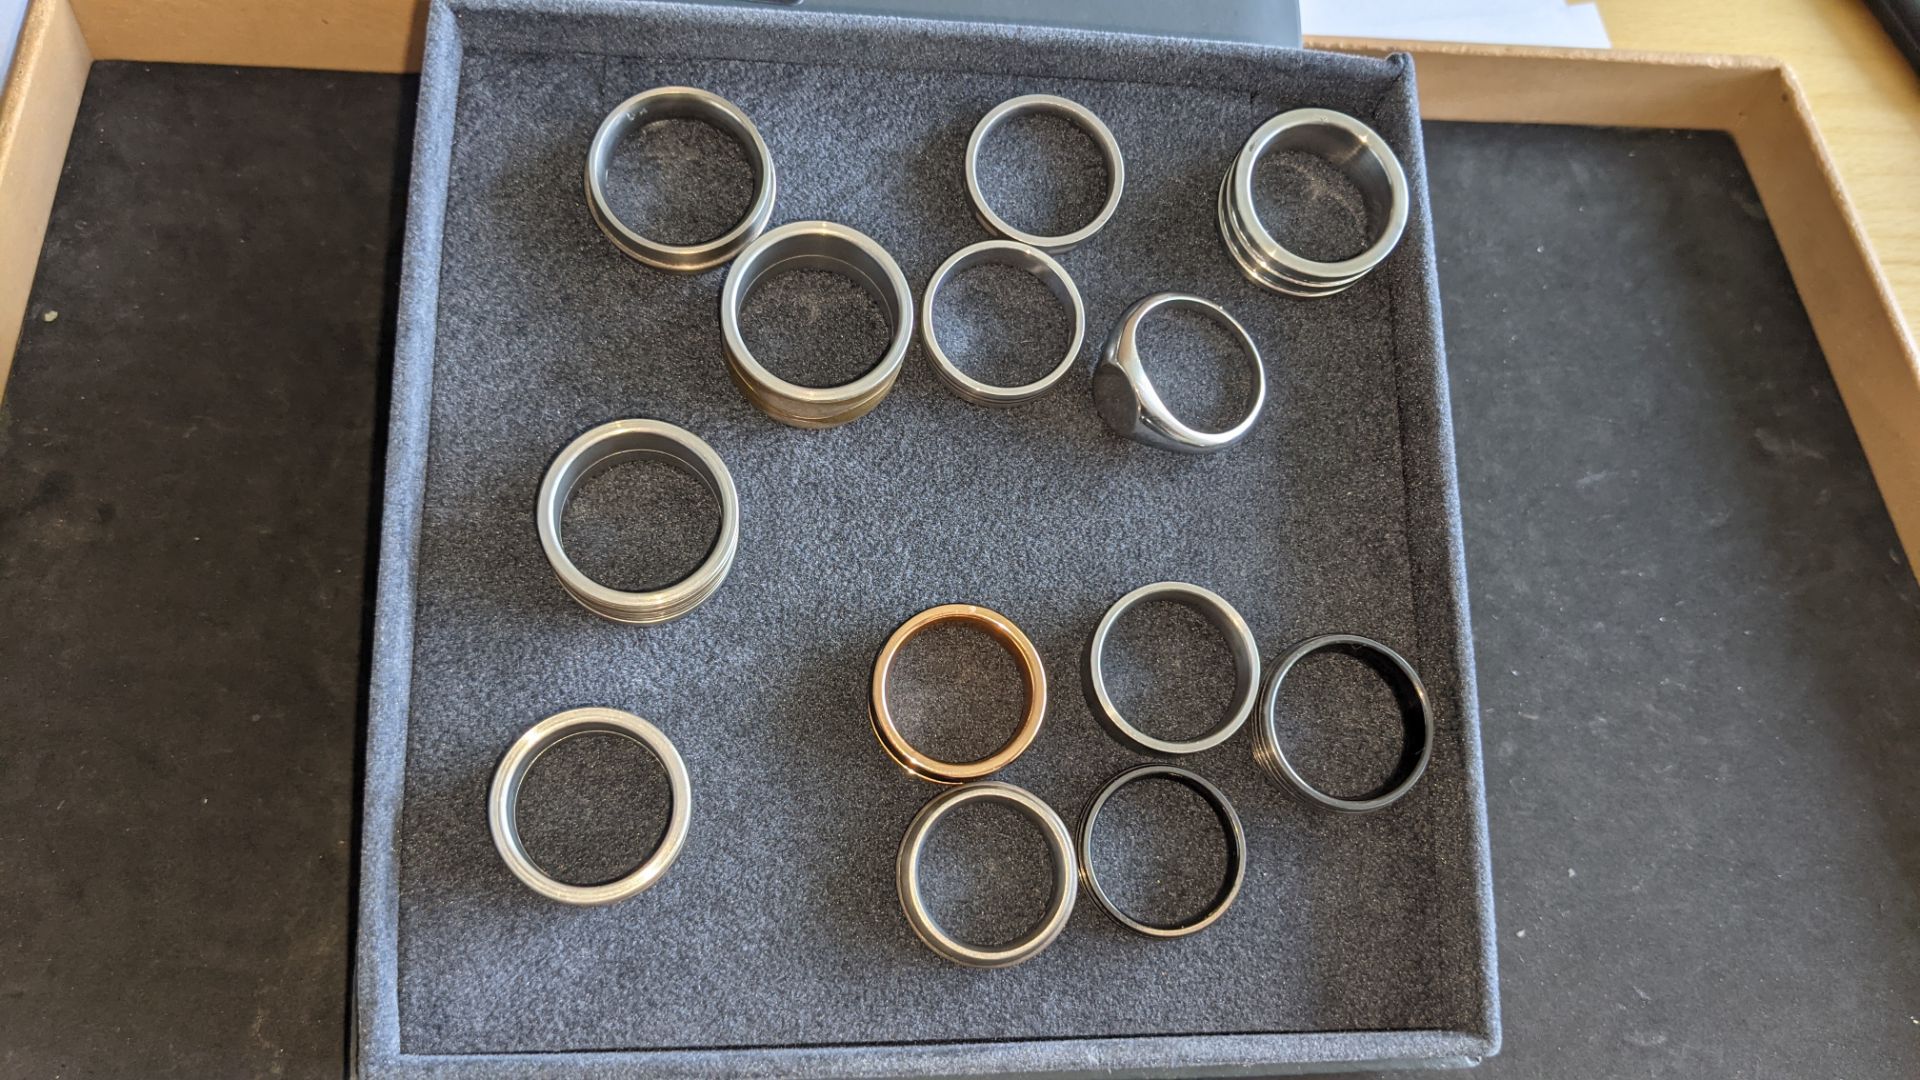 13 assorted men's rings. Understood to be made of a variety of materials including silver, stainless - Image 7 of 8